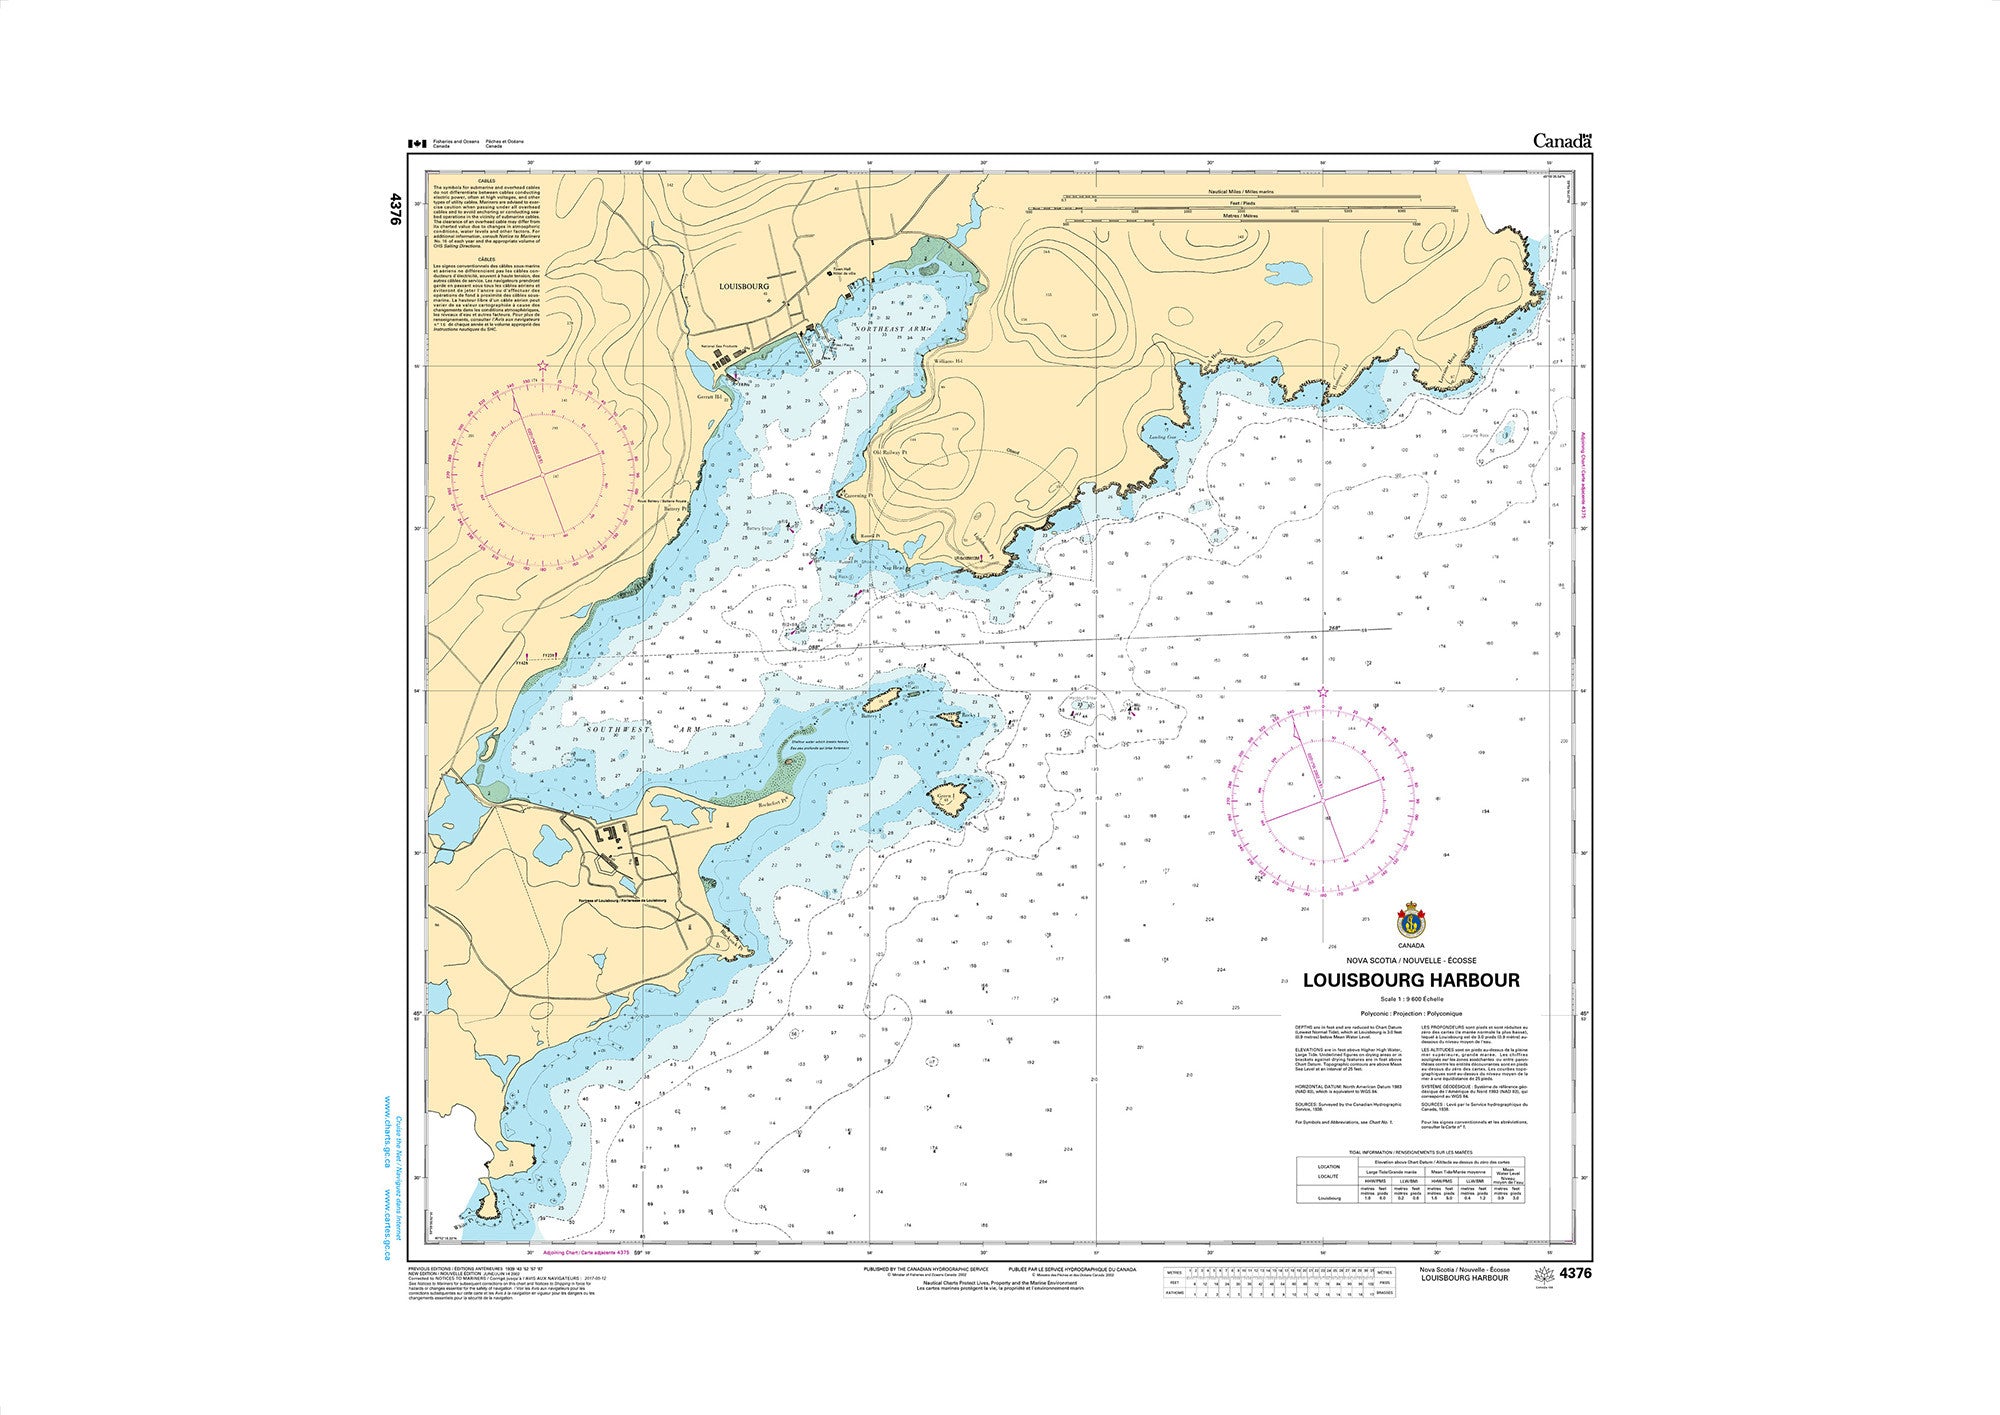 Canadian Hydrographic Service Nautical Chart CHS4376: Louisbourg Harbour